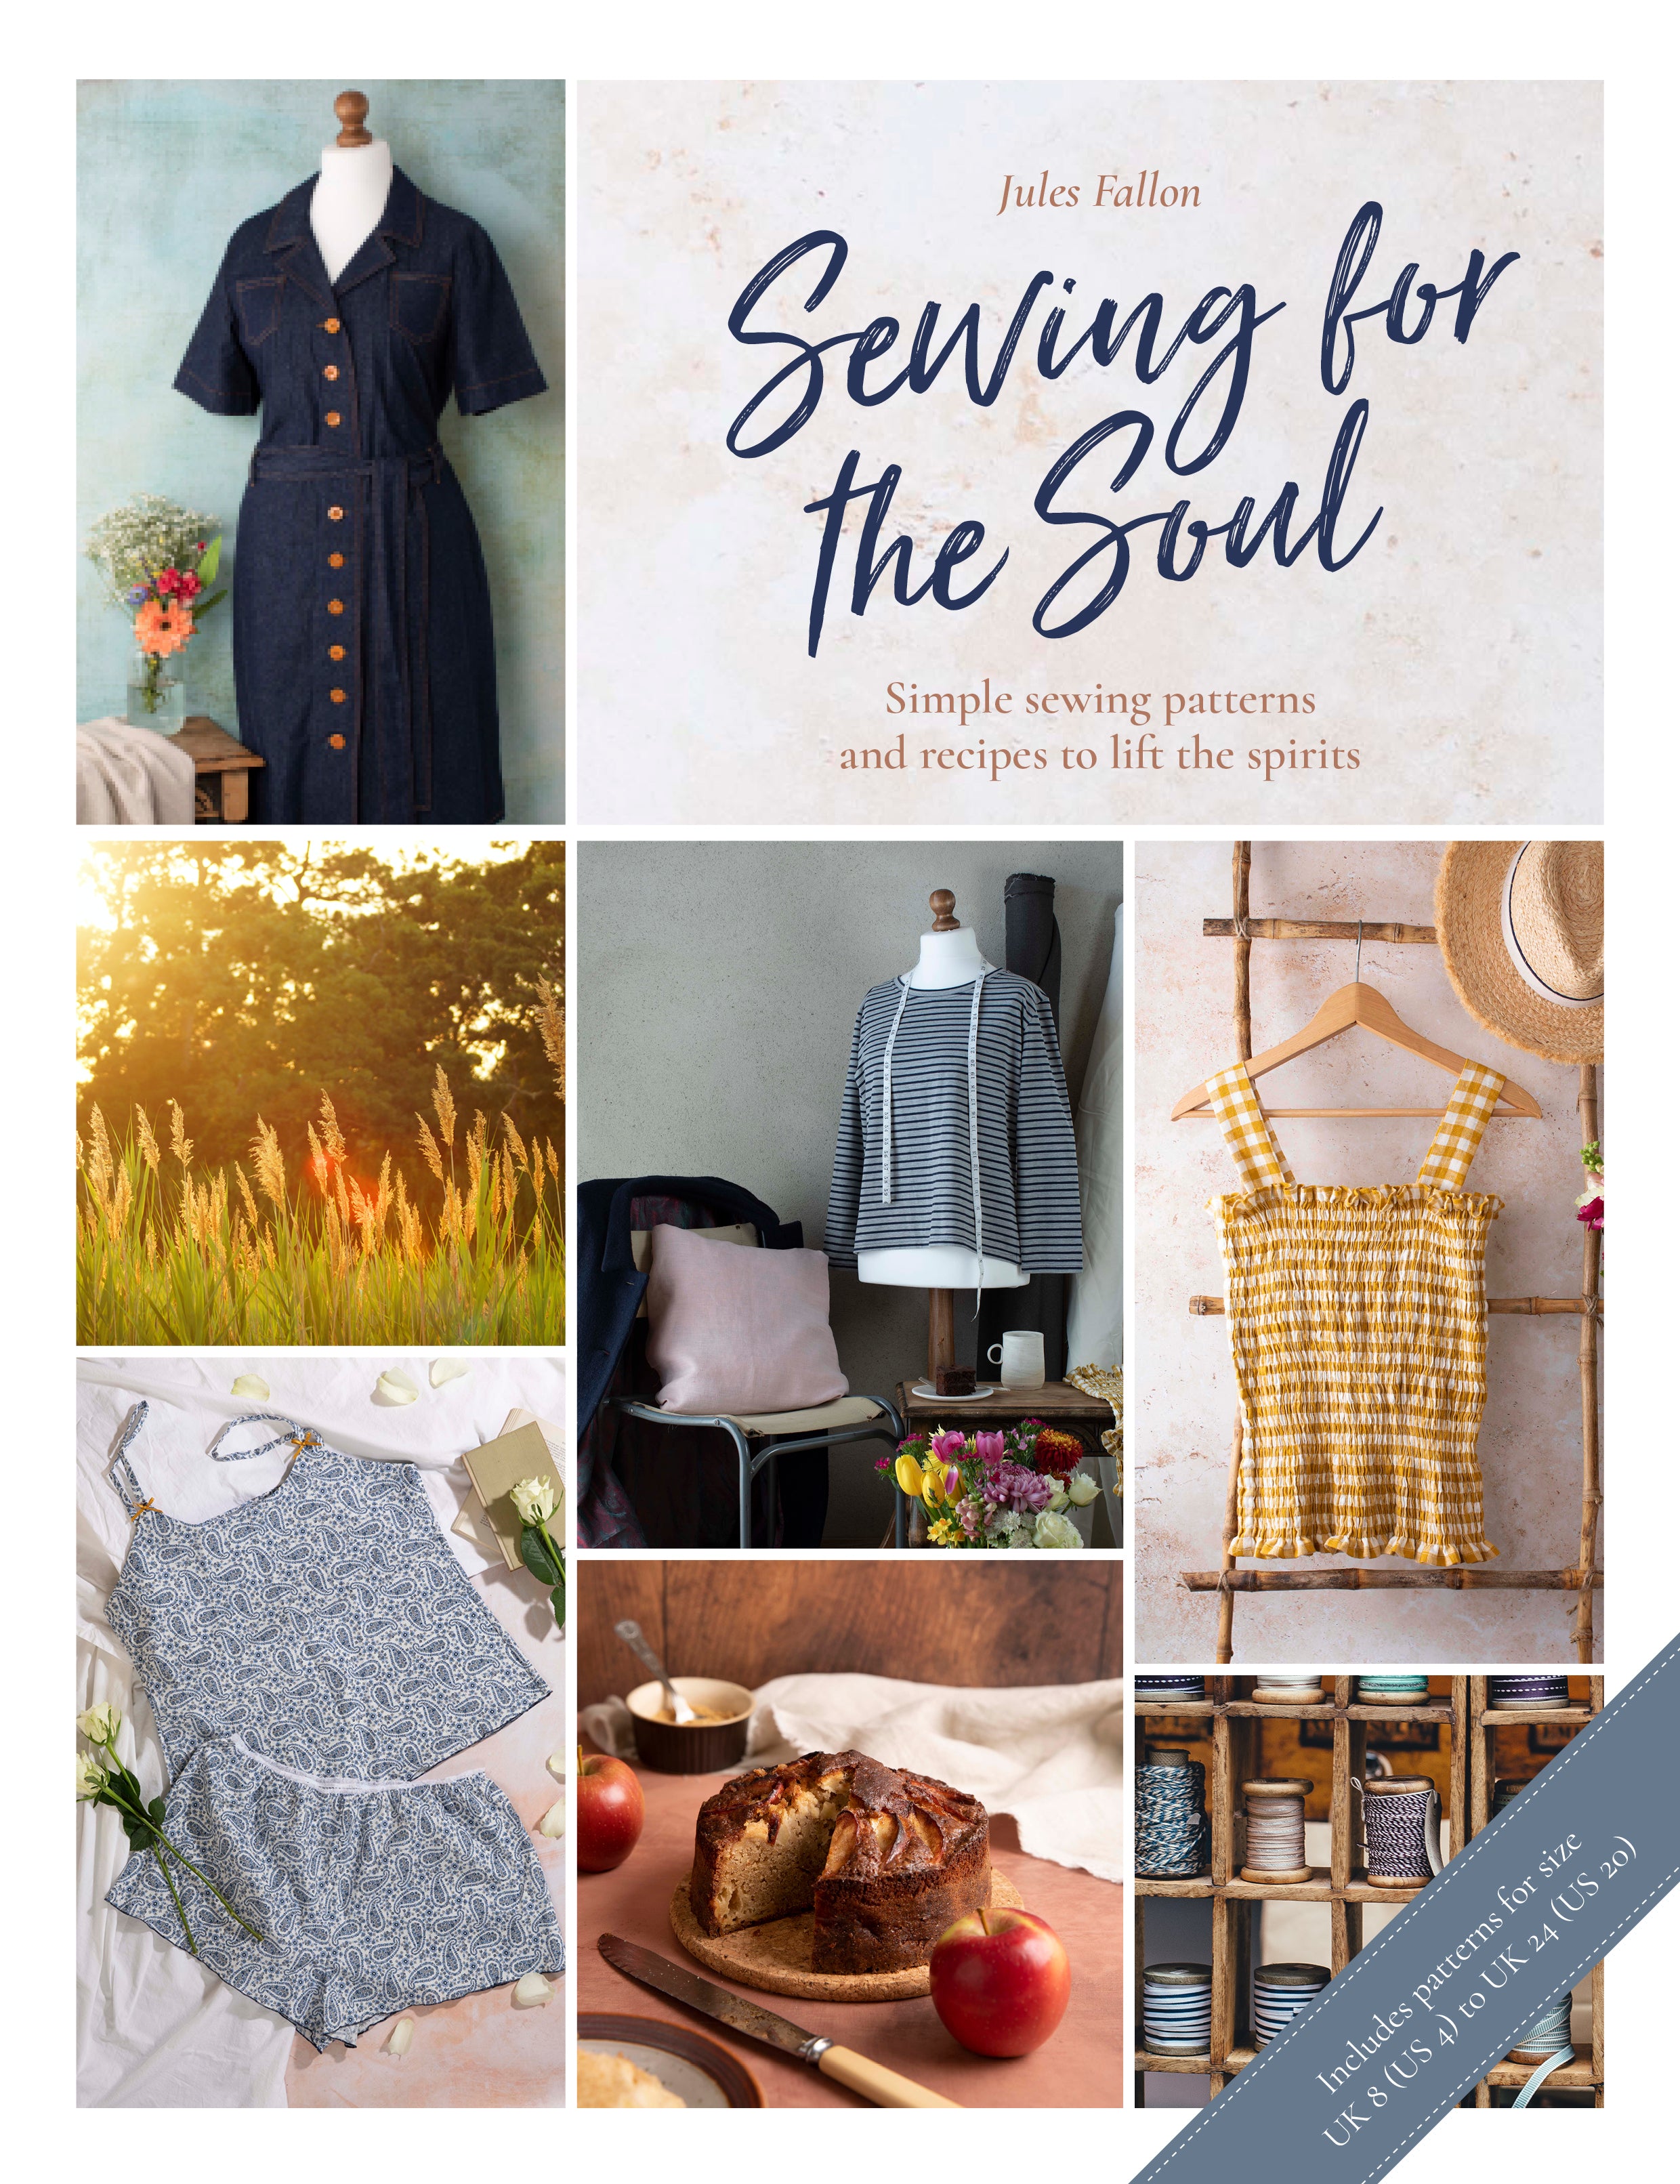 Sewing for the Soul - Jules' BRAND NEW Book